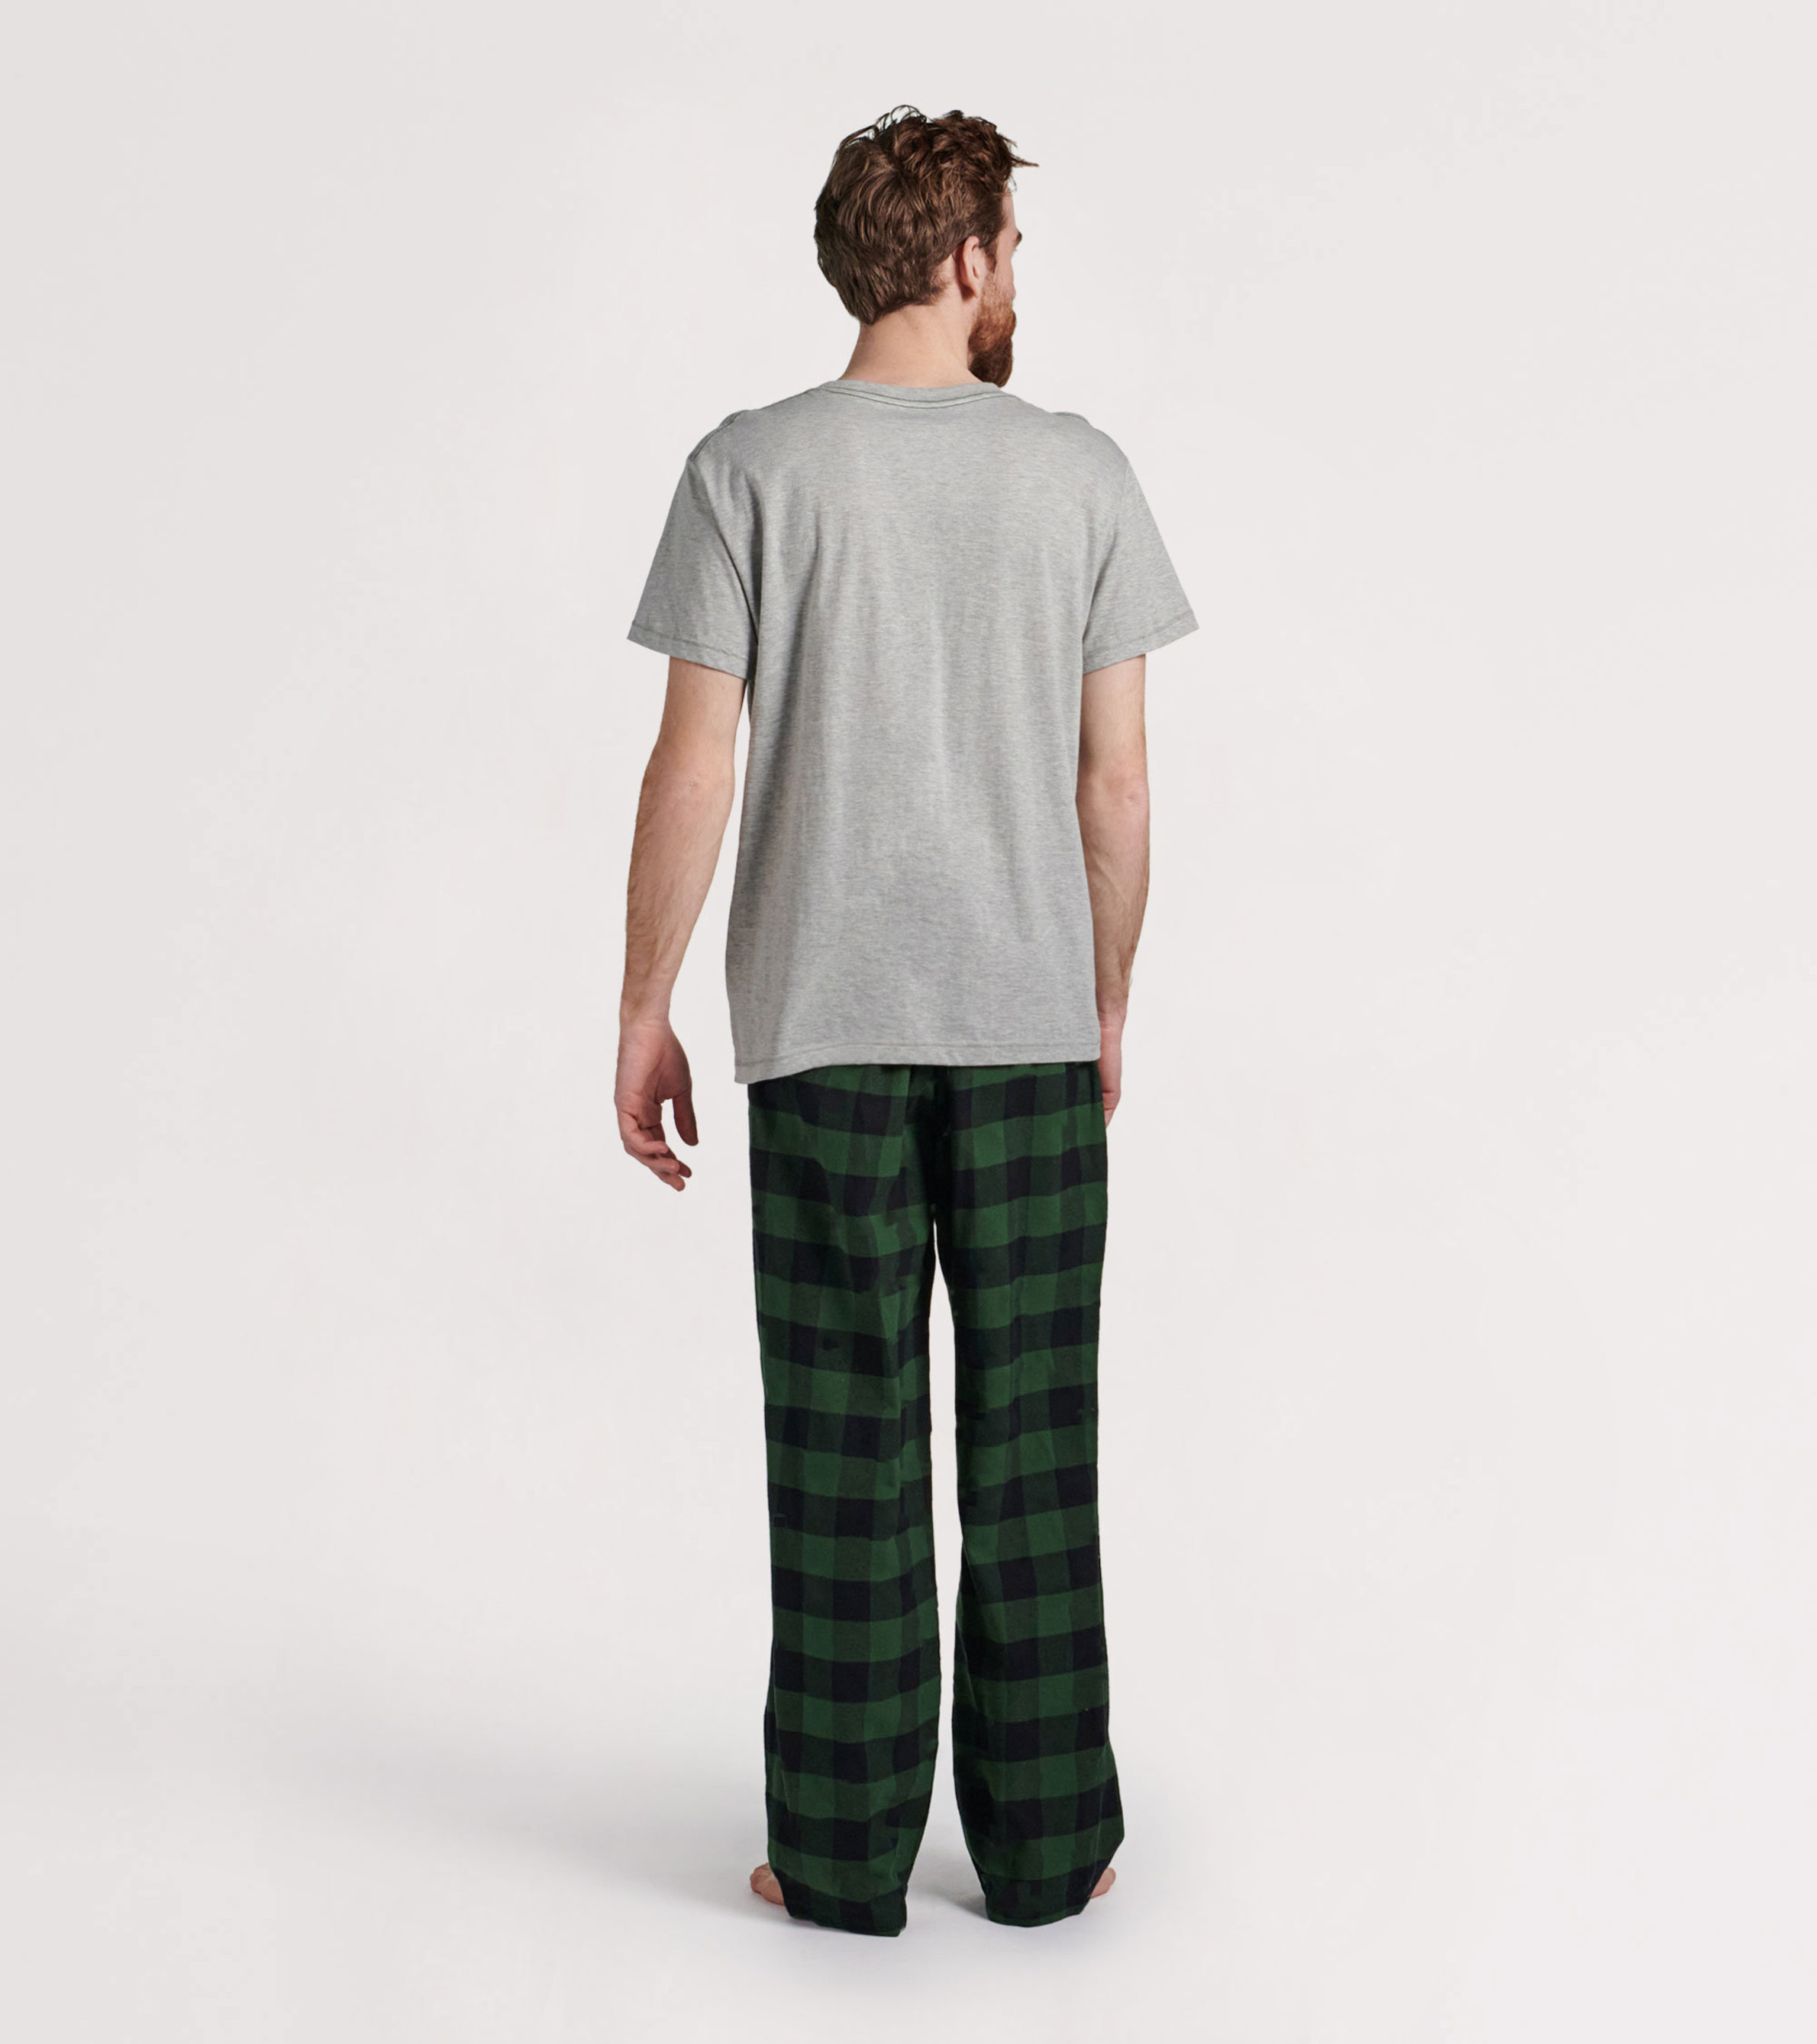 Fruit Of The Loom Men's Jersey Knit Top and Flannel Pajama Pants Set,  2-Piece, Sizes S-5XL - Walmart.com